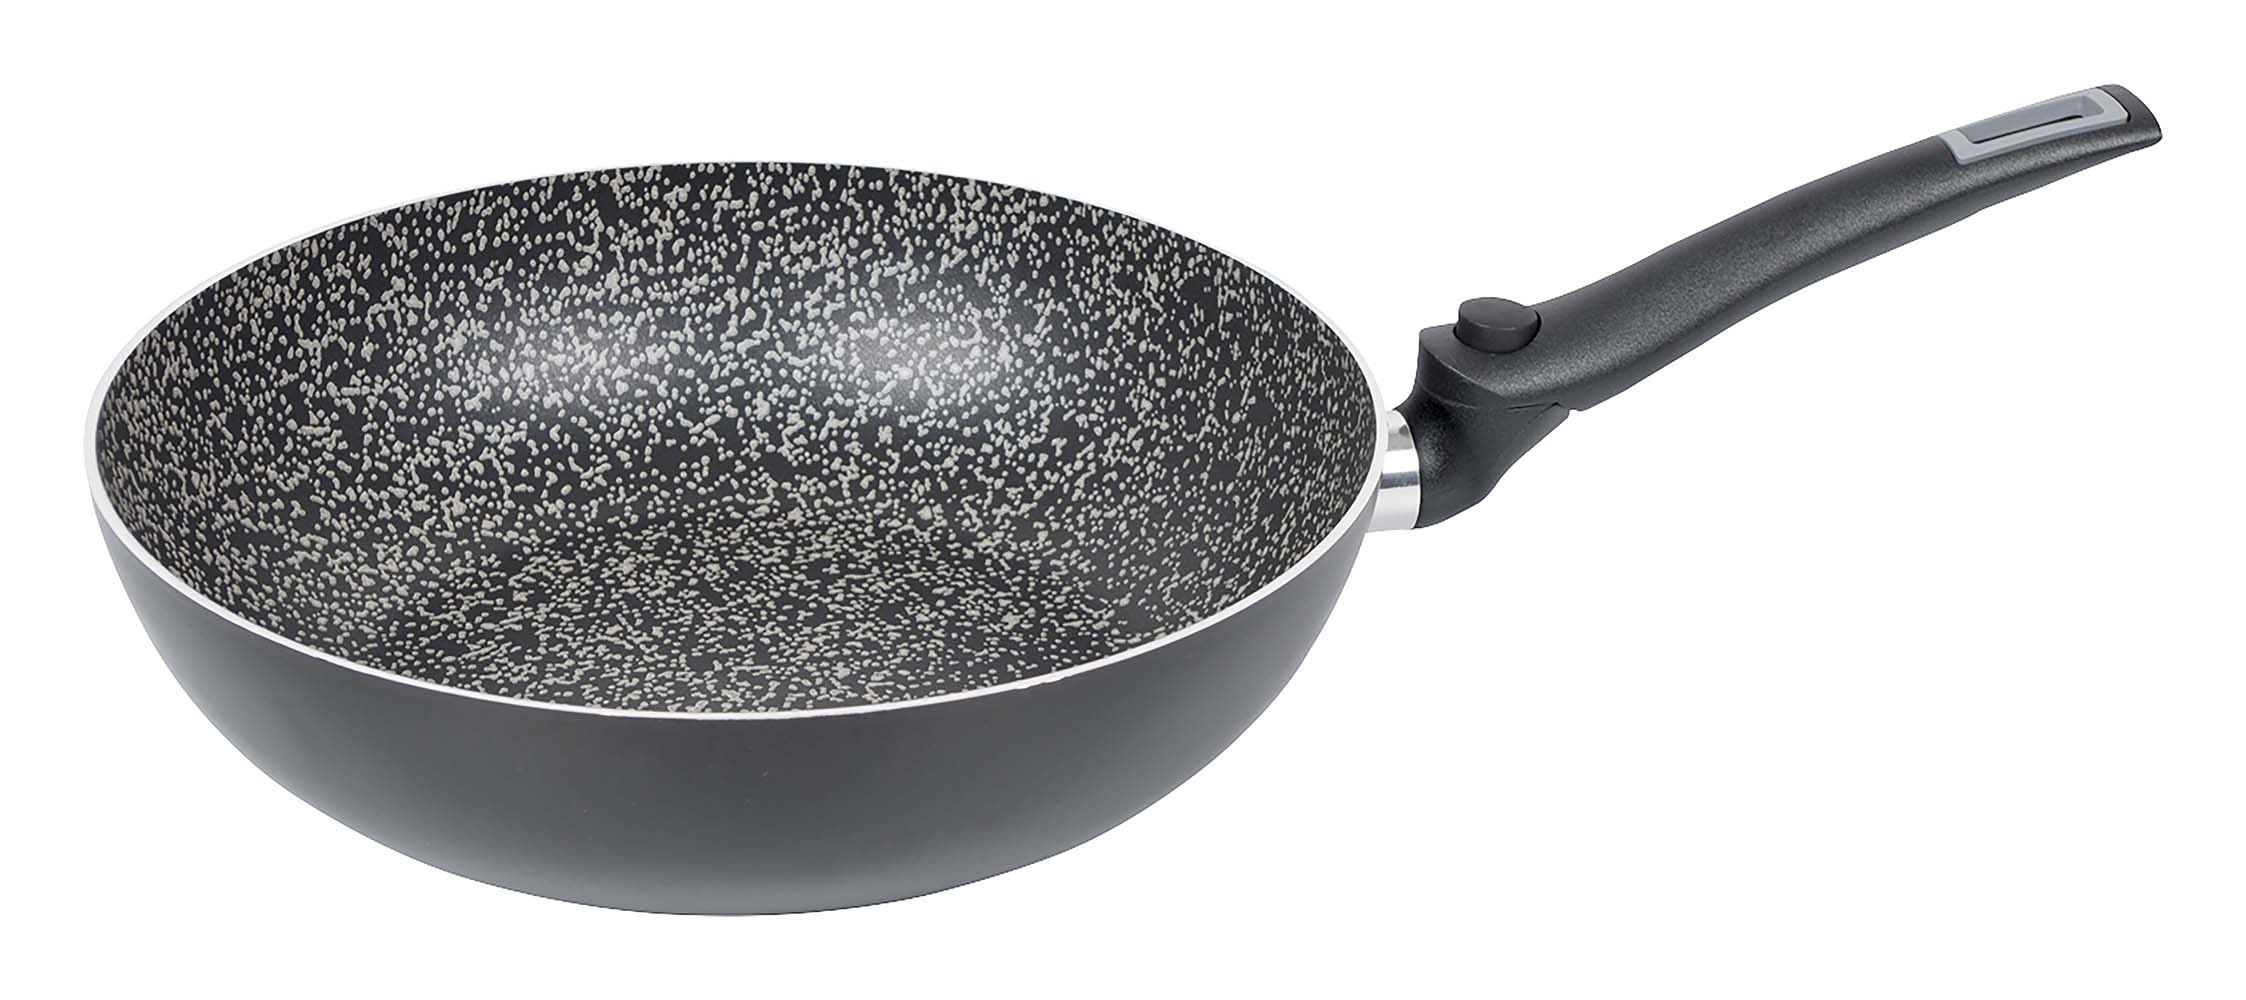 2304458 An aluminium induction wok with foldaway handle. Comes with a 5 layer Salus Stone coating and an anti-slip base. This pan has a foldaway handle and therefore makes good use of space and is easy to take with you. Thickness: 2.5 millimetres.